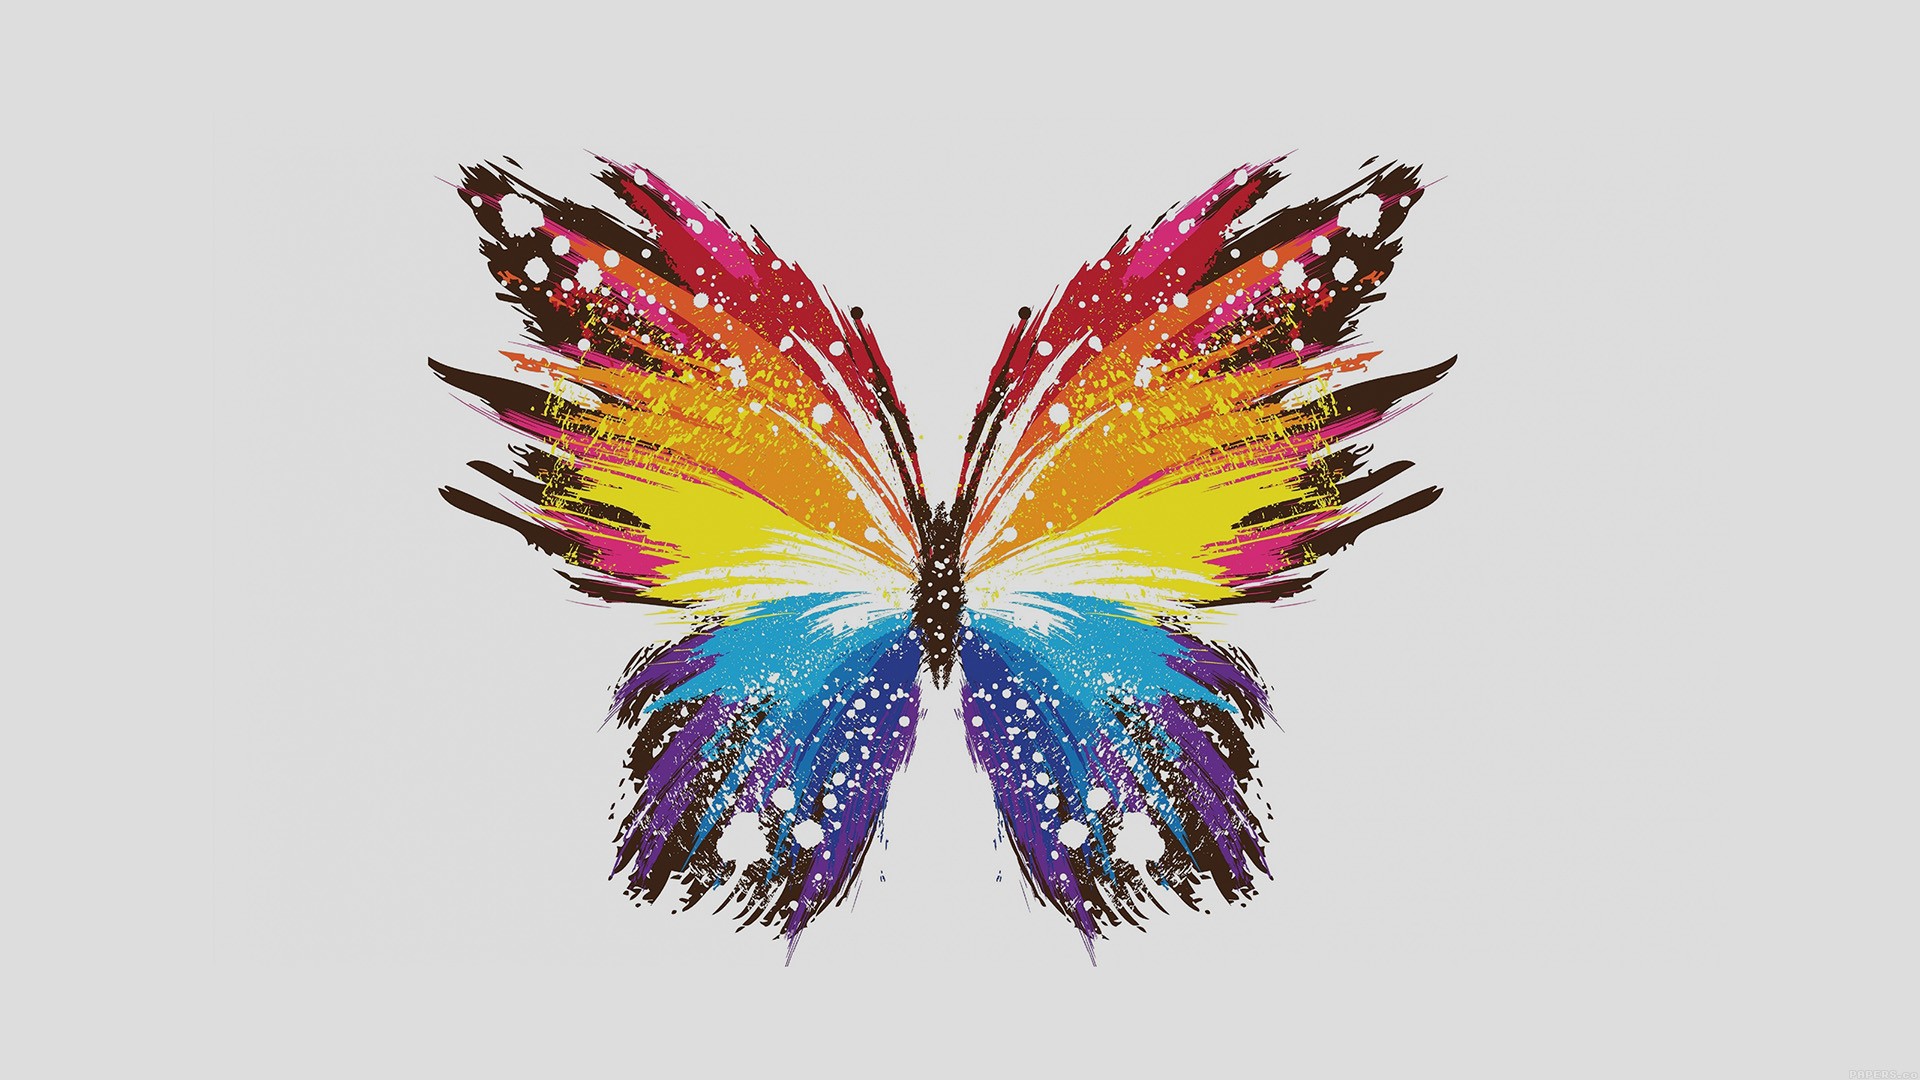 General 1920x1080 digital art simple background minimalism butterfly paint splatter wings colorful white background animals insect artwork